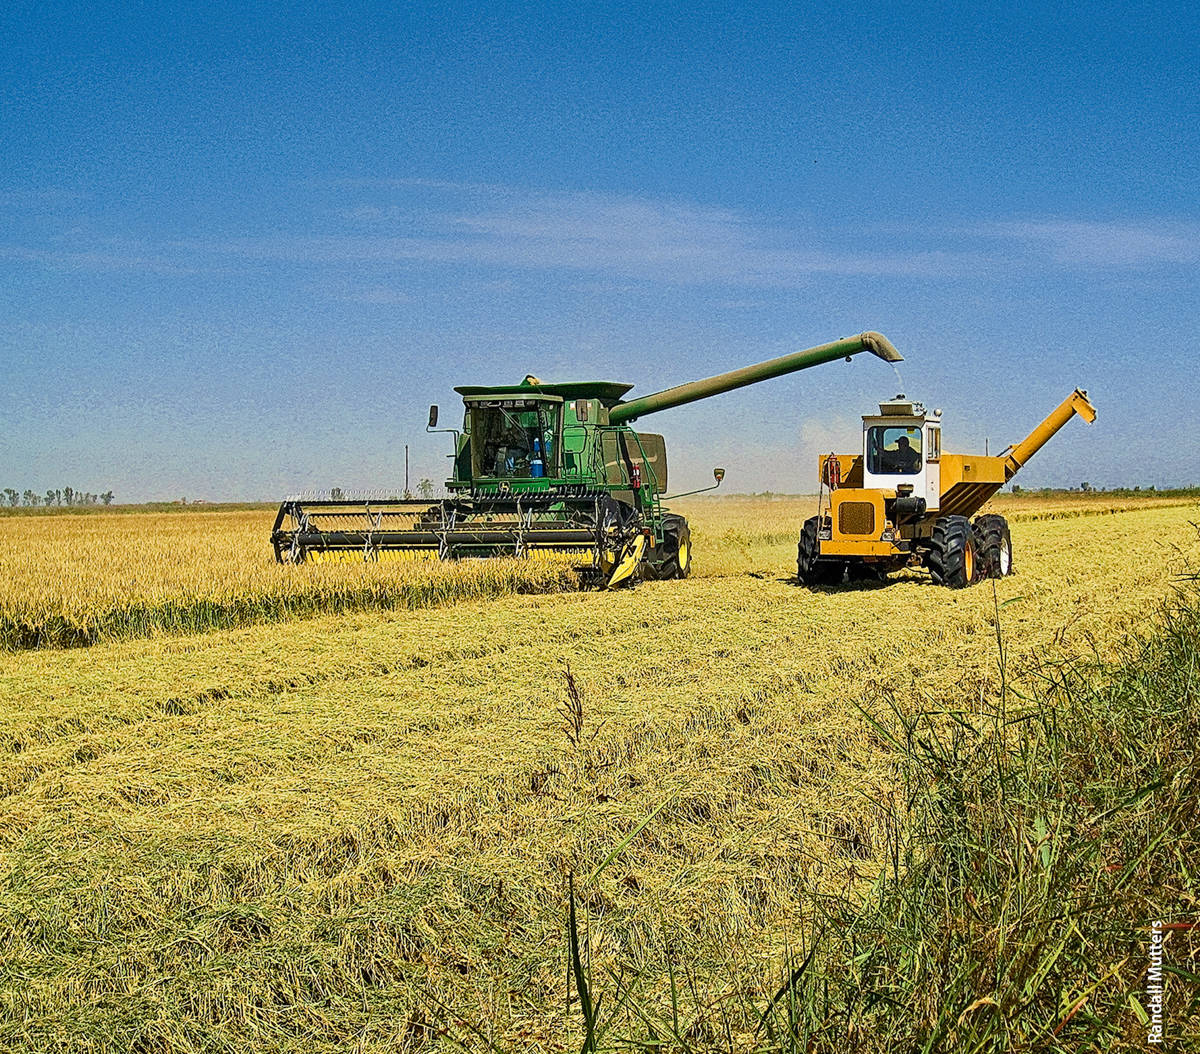 An analysis of U.S. agricultural production over the past 100 years indicates that the rate of productivity growth has slowed considerably. In the final 10 to 20 years of the researchers' dataset, farm productivity grew at only half the rate that had been sustained for much of the 20th century. The researchers suggest that the slowdown could be related to an earlier slowdown in the growth of spending on agricultural research and development.